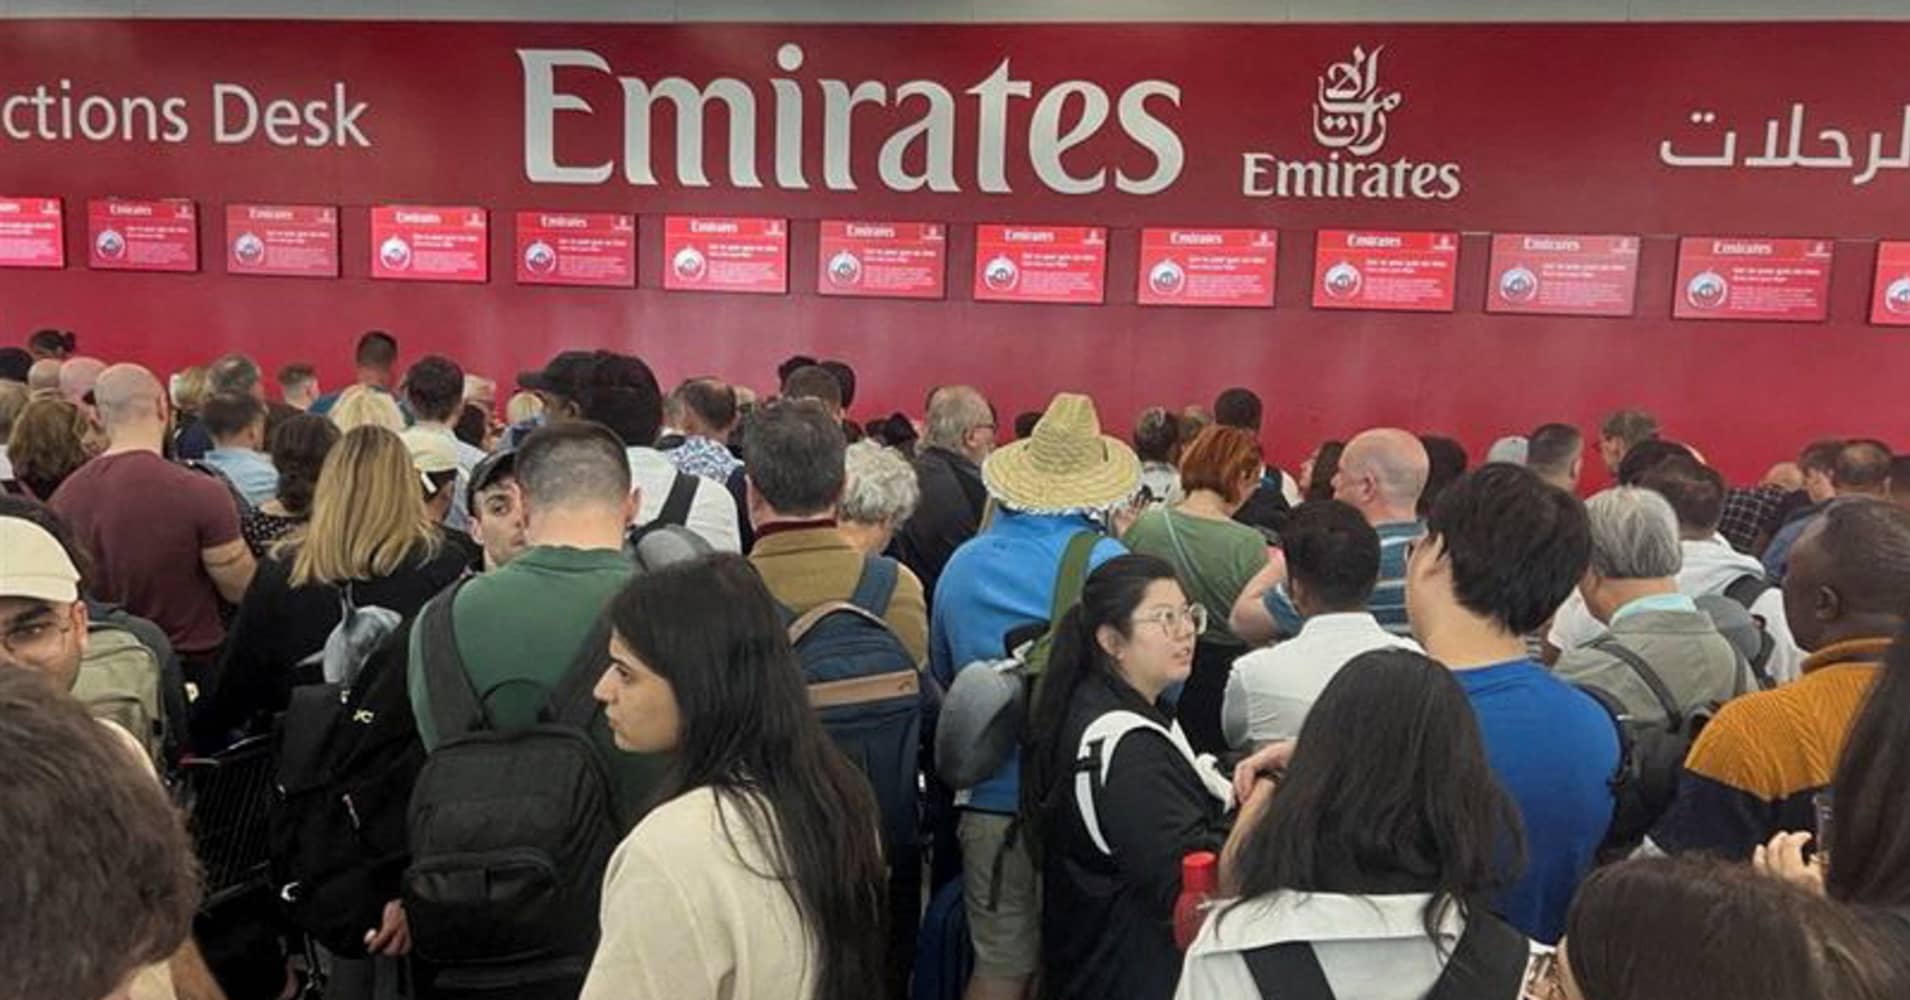 emirates ceo issues apology after dubai flood chaos; says airline has 30,000 suitcases to return